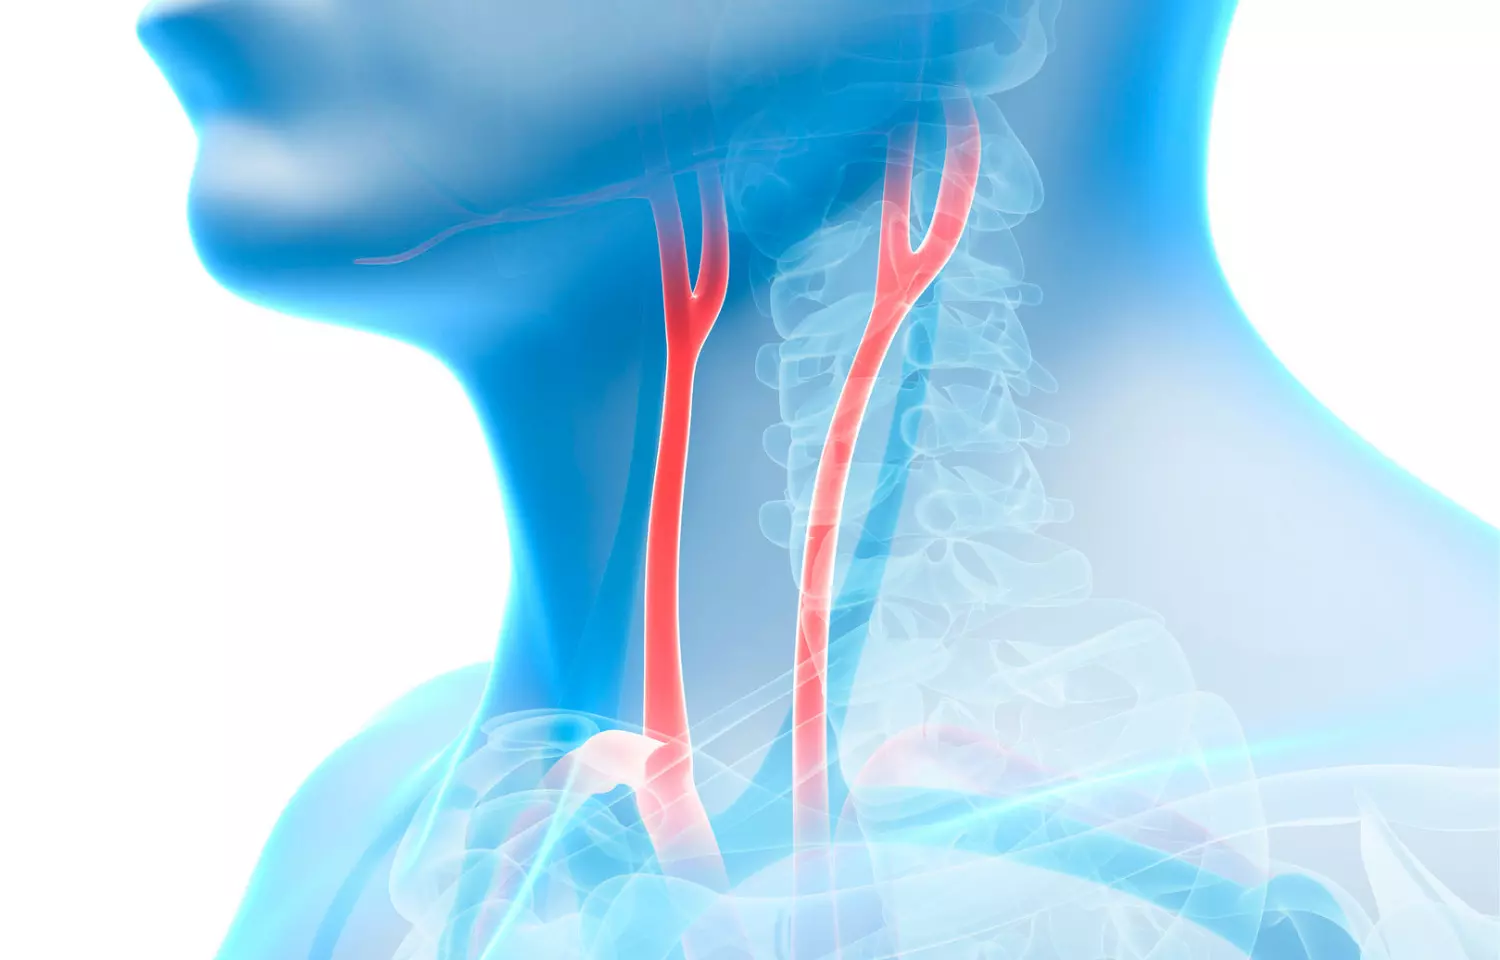 Asymptomatic carotid stenosis has low stroke risk, may not require surgery: JAMA